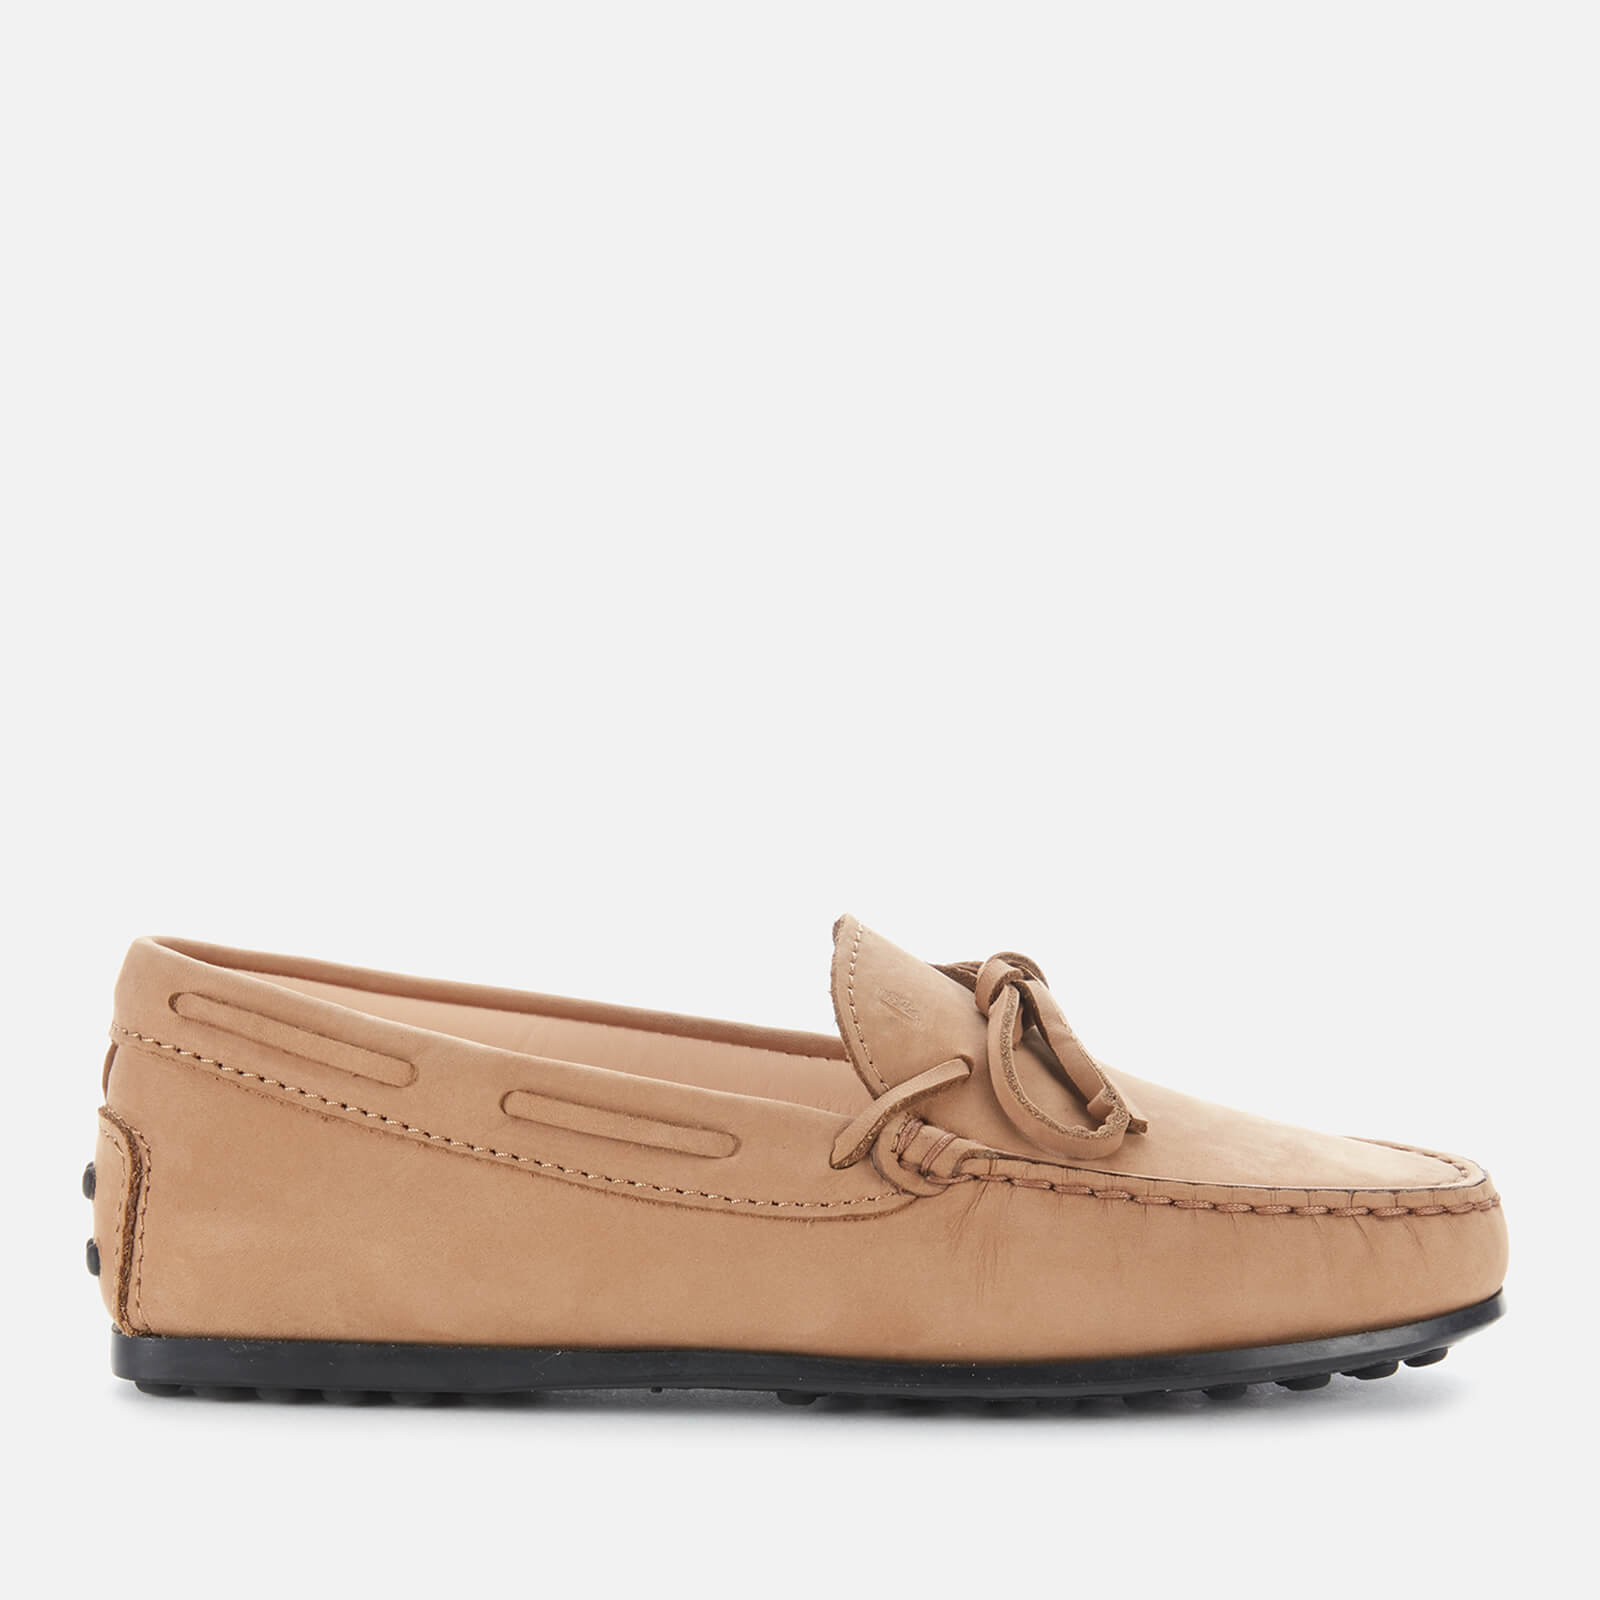 Tods Toddlers' Suede Loafers - Brown - UK 11 Kids